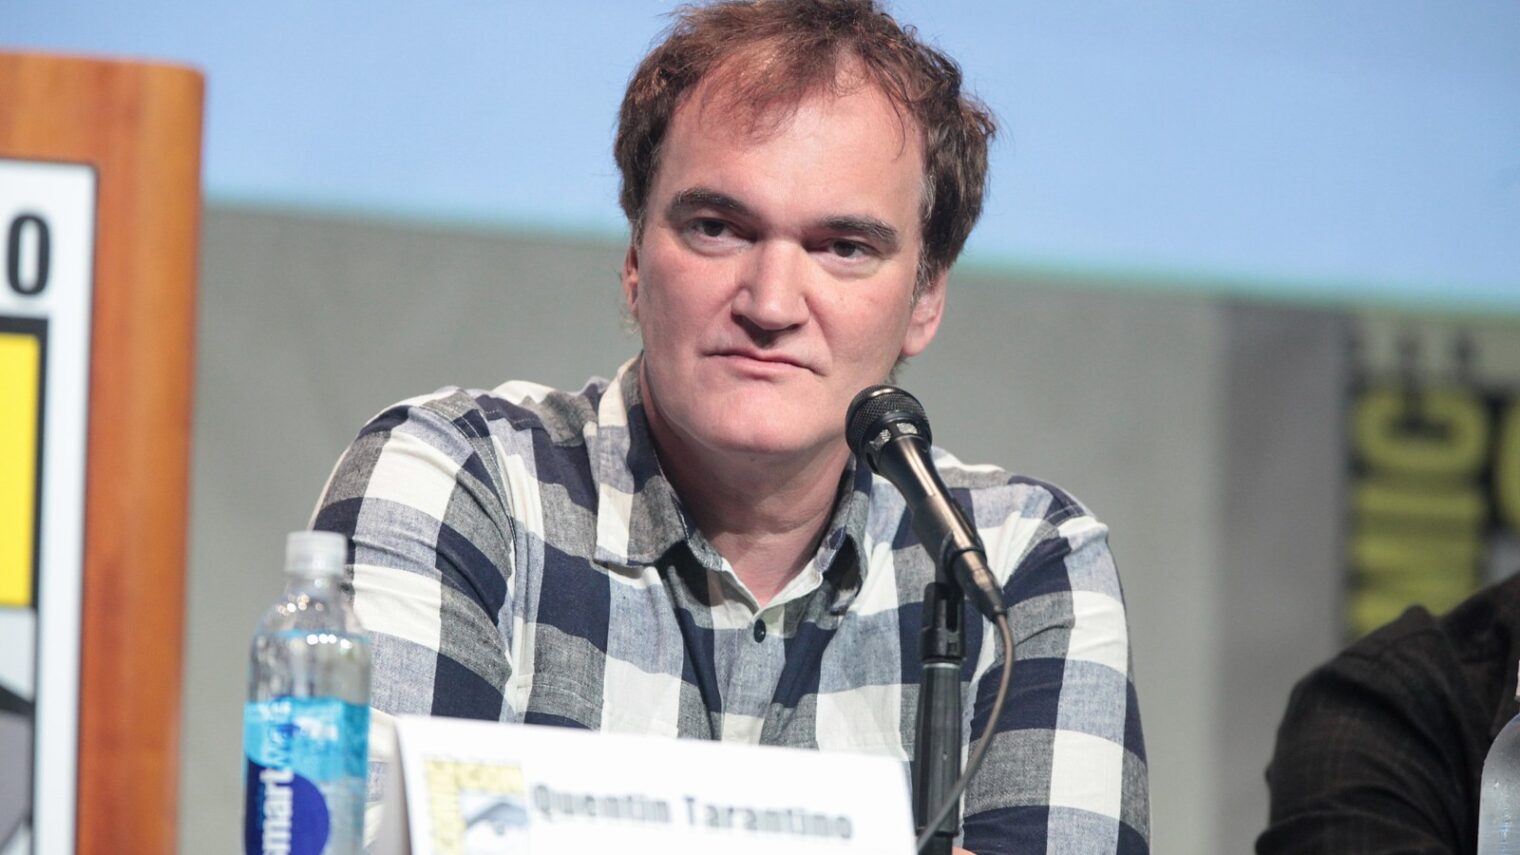 Quentin Tarantino speaking at the 2015 San Diego Comic Con International. Photo by Gage Skidmore via Wikimedia Commons